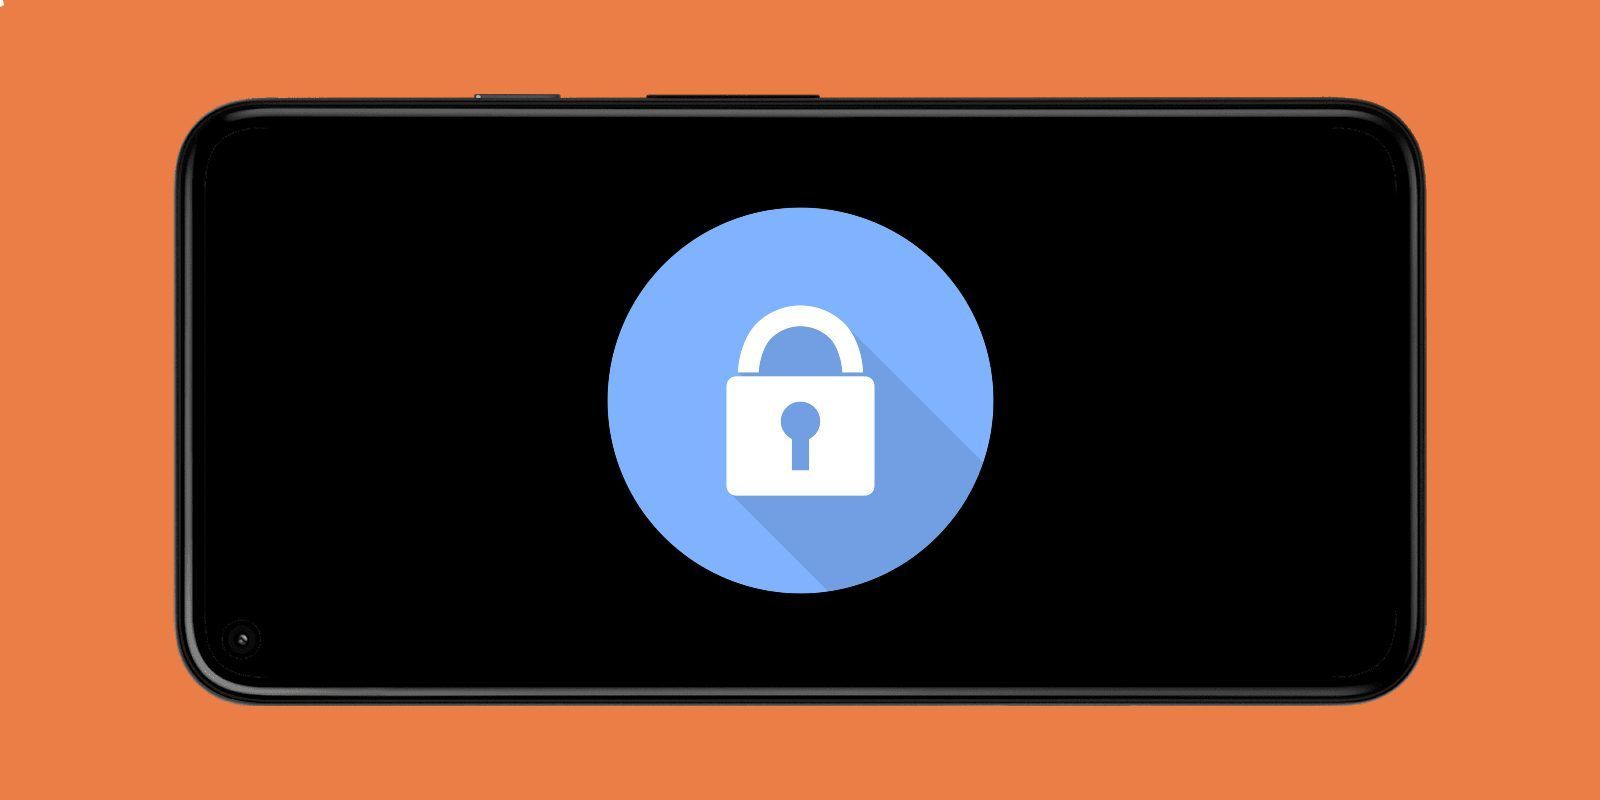 A lock symbol on an Android phone